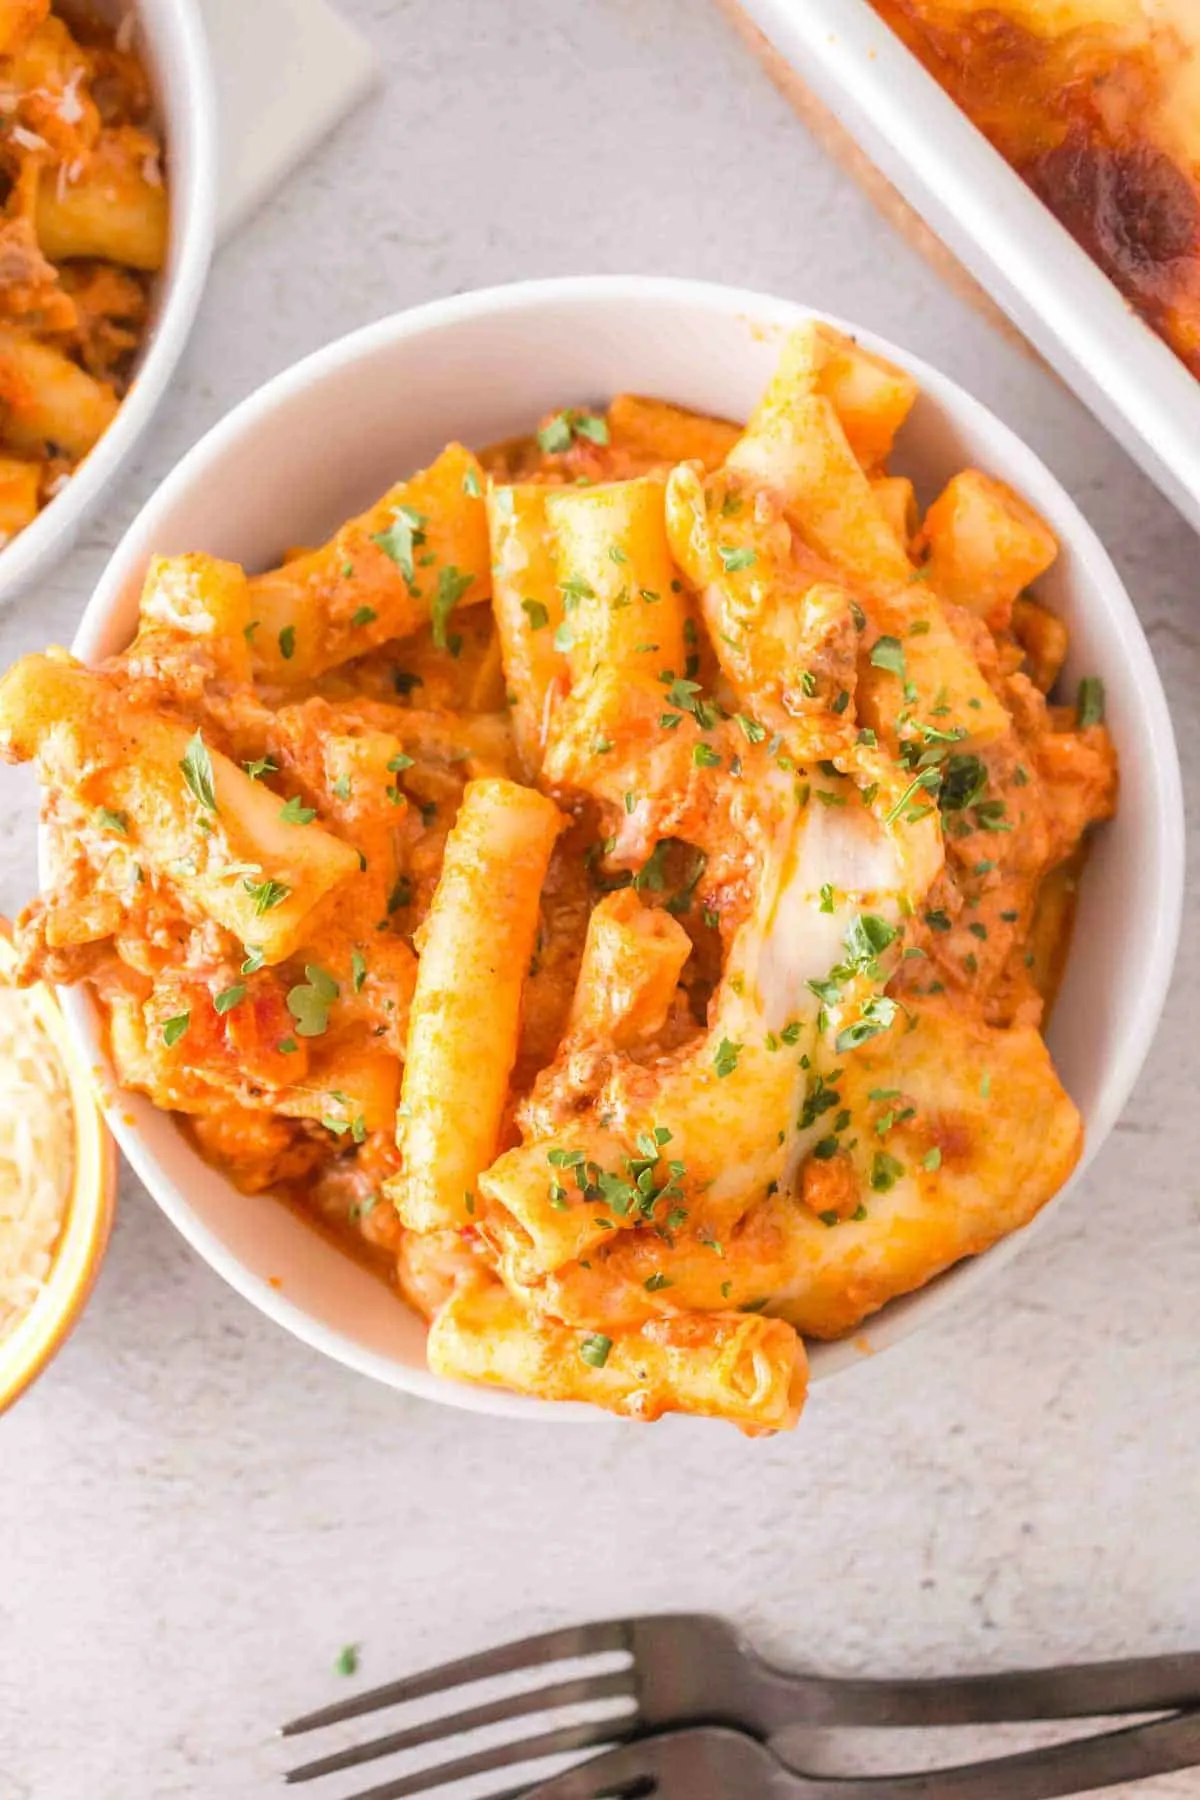 Baked Ziti with Ground Beef is a hearty baked pasta recipe loaded with ground beef, marinara sauce, sour cream, heavy cream, provolone and mozzarella cheese.